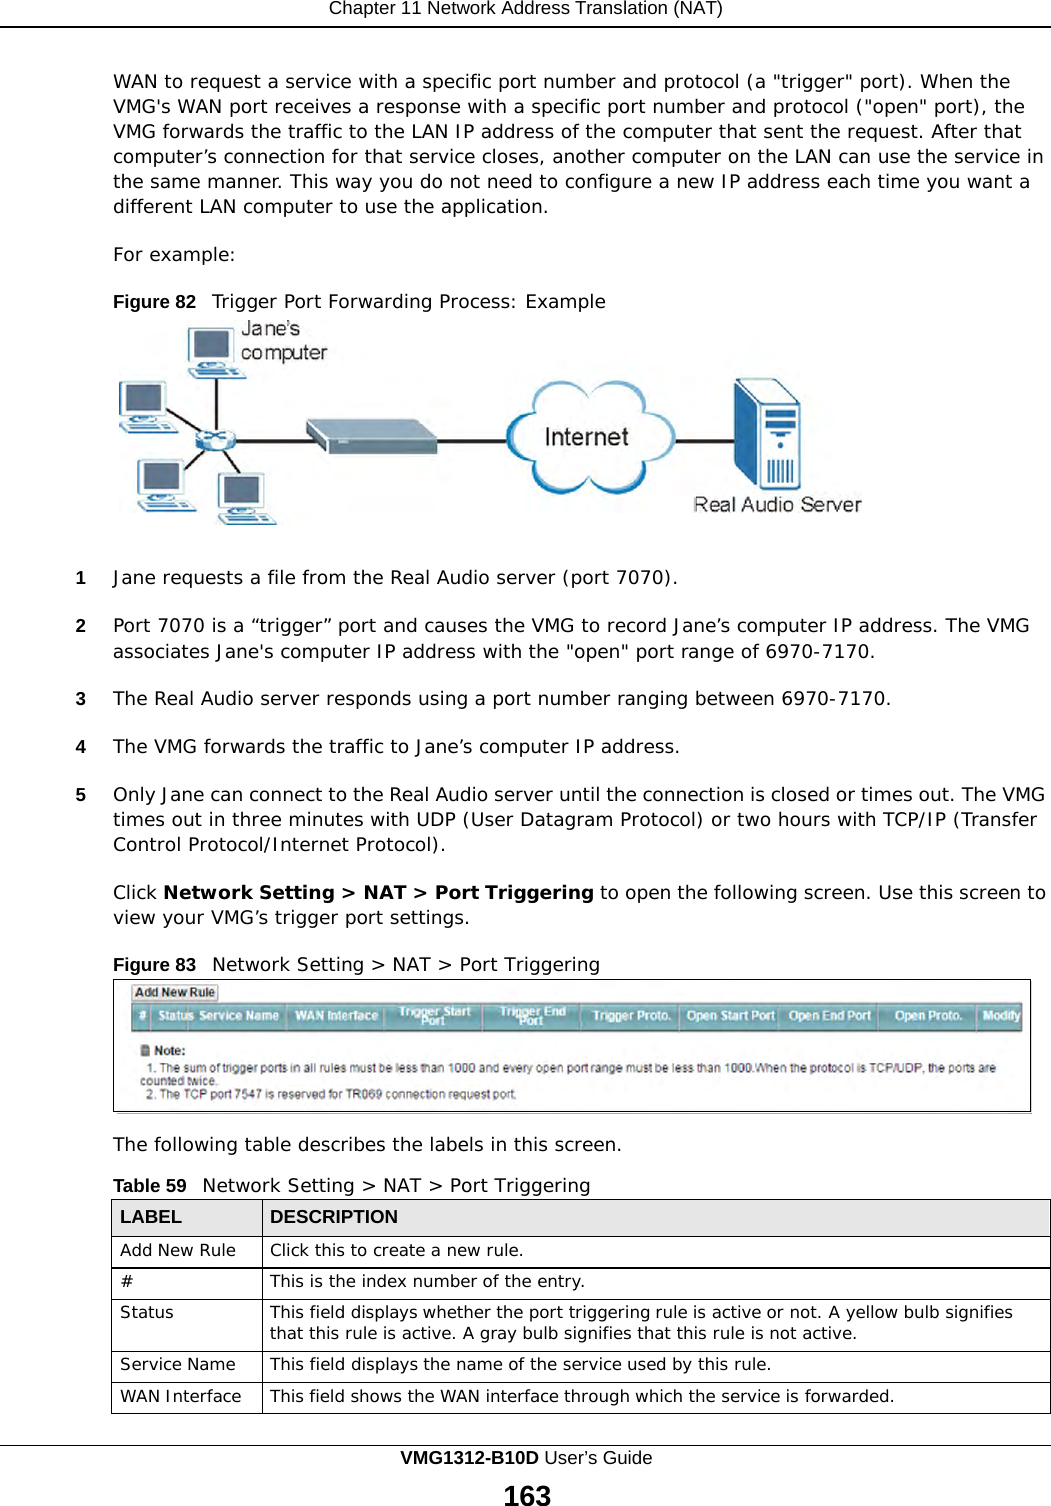 Chapter 11 Network Address Translation (NAT)      WAN to request a service with a specific port number and protocol (a &quot;trigger&quot; port). When the VMG&apos;s WAN port receives a response with a specific port number and protocol (&quot;open&quot; port), the VMG forwards the traffic to the LAN IP address of the computer that sent the request. After that computer’s connection for that service closes, another computer on the LAN can use the service in the same manner. This way you do not need to configure a new IP address each time you want a different LAN computer to use the application.  For example:  Figure 82   Trigger Port Forwarding Process: Example    1  Jane requests a file from the Real Audio server (port 7070).  2  Port 7070 is a “trigger” port and causes the VMG to record Jane’s computer IP address. The VMG associates Jane&apos;s computer IP address with the &quot;open&quot; port range of 6970-7170.  3  The Real Audio server responds using a port number ranging between 6970-7170.  4  The VMG forwards the traffic to Jane’s computer IP address.  5  Only Jane can connect to the Real Audio server until the connection is closed or times out. The VMG times out in three minutes with UDP (User Datagram Protocol) or two hours with TCP/IP (Transfer Control Protocol/Internet Protocol).  Click Network Setting &gt; NAT &gt; Port Triggering to open the following screen. Use this screen to view your VMG’s trigger port settings.  Figure 83   Network Setting &gt; NAT &gt; Port Triggering         The following table describes the labels in this screen.  Table 59   Network Setting &gt; NAT &gt; Port Triggering  LABEL DESCRIPTION Add New Rule Click this to create a new rule. # This is the index number of the entry. Status This field displays whether the port triggering rule is active or not. A yellow bulb signifies that this rule is active. A gray bulb signifies that this rule is not active. Service Name This field displays the name of the service used by this rule. WAN Interface This field shows the WAN interface through which the service is forwarded. VMG1312-B10D User’s Guide 163  